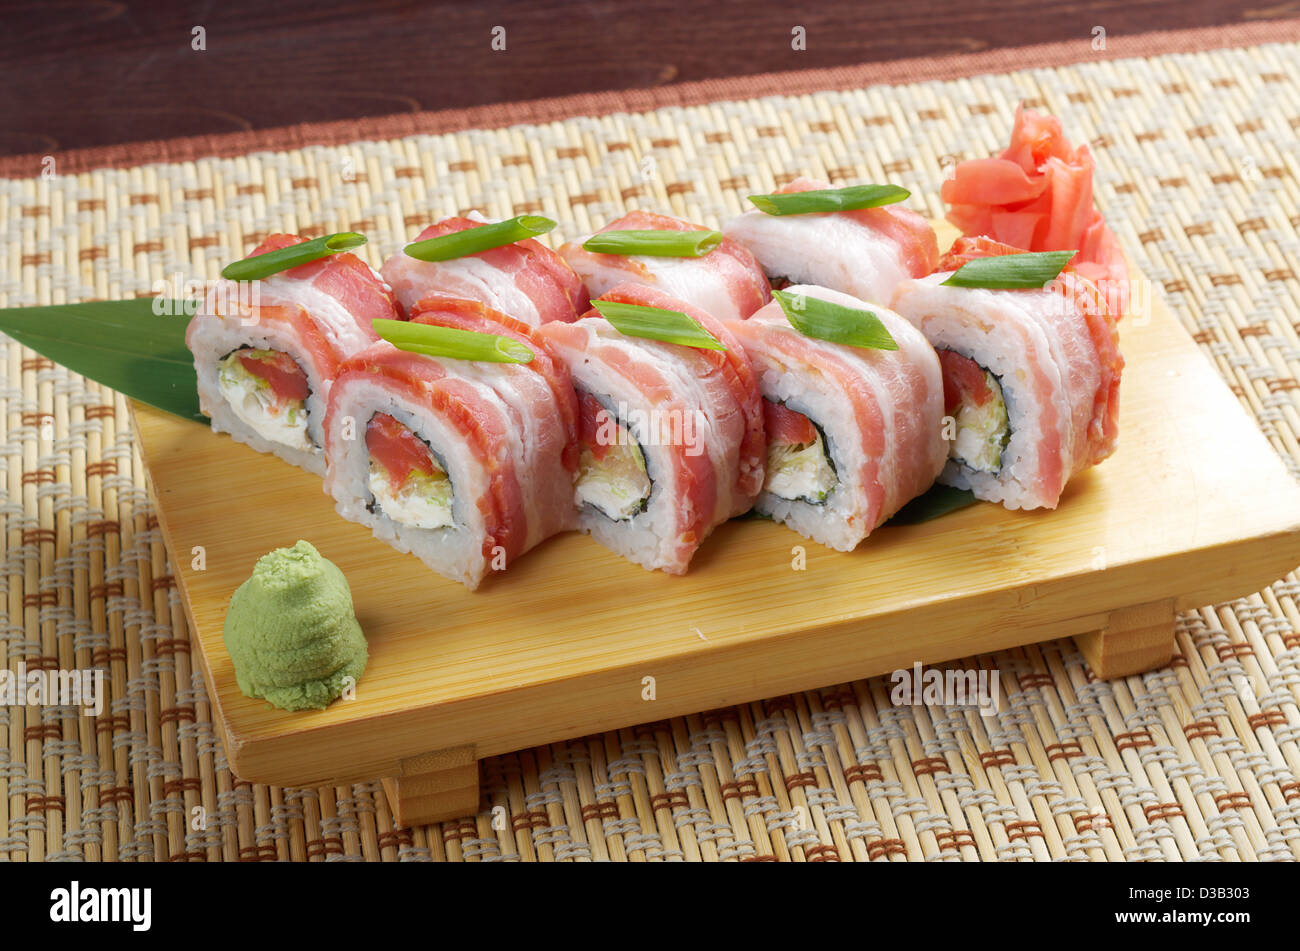 Japanese Cuisine - Sushi Roll with Bacon  Stock Photo